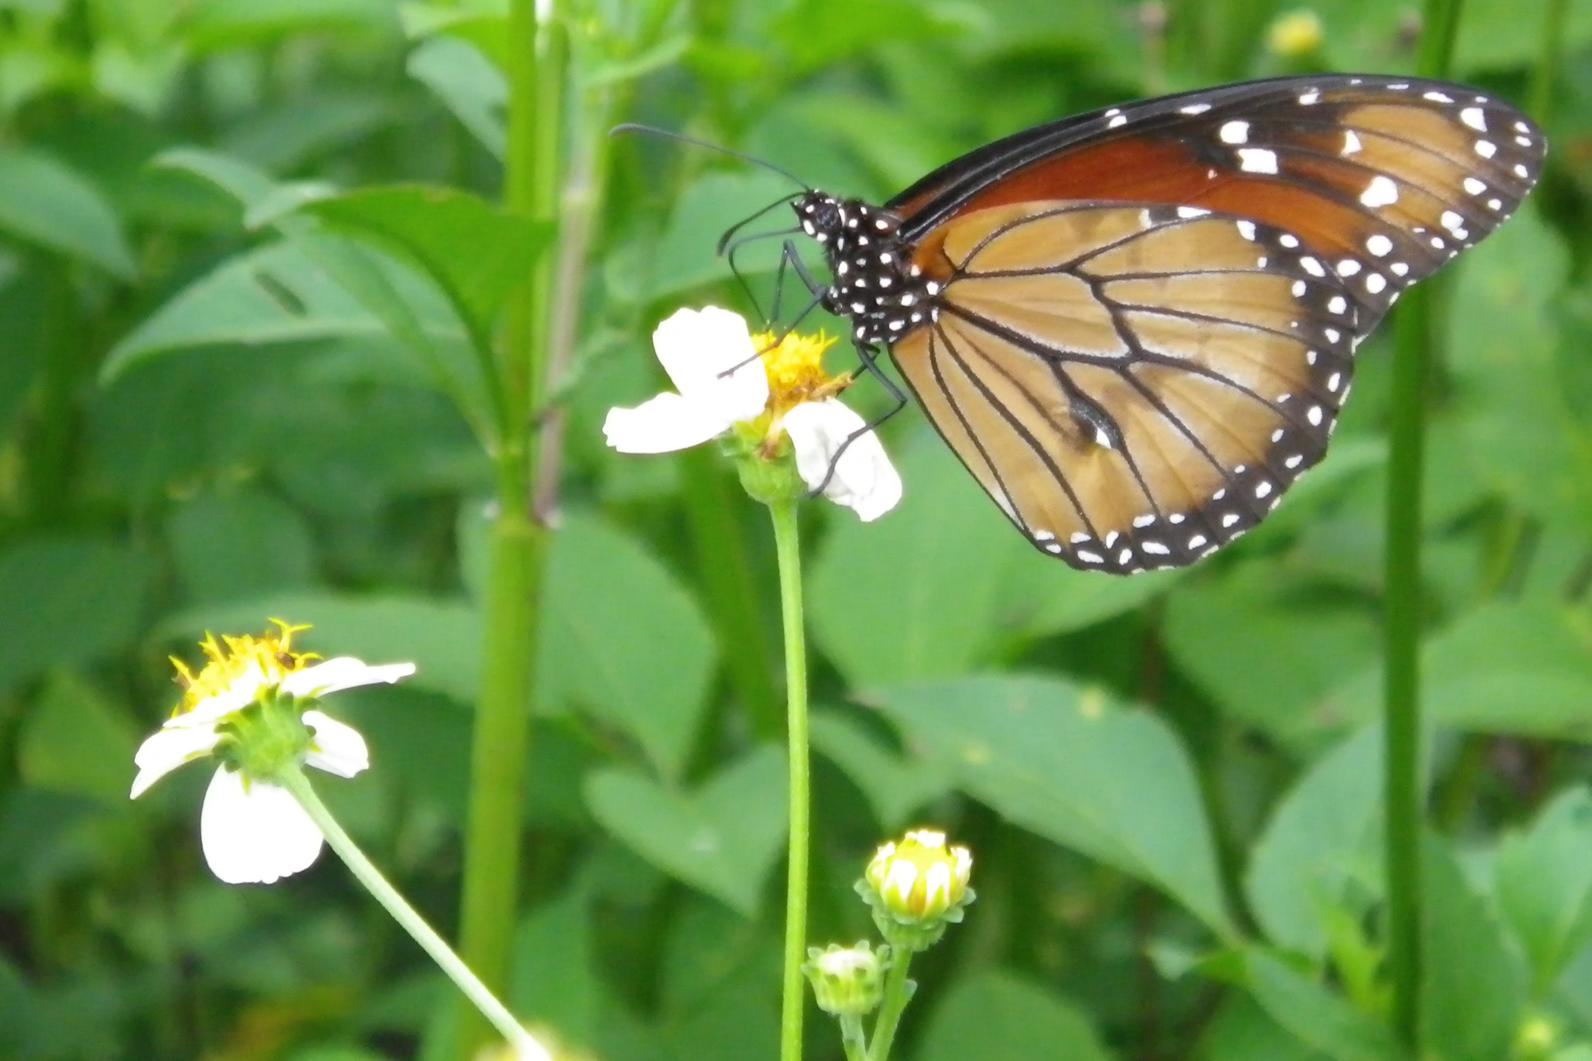 NABA - North American Butterfly Association